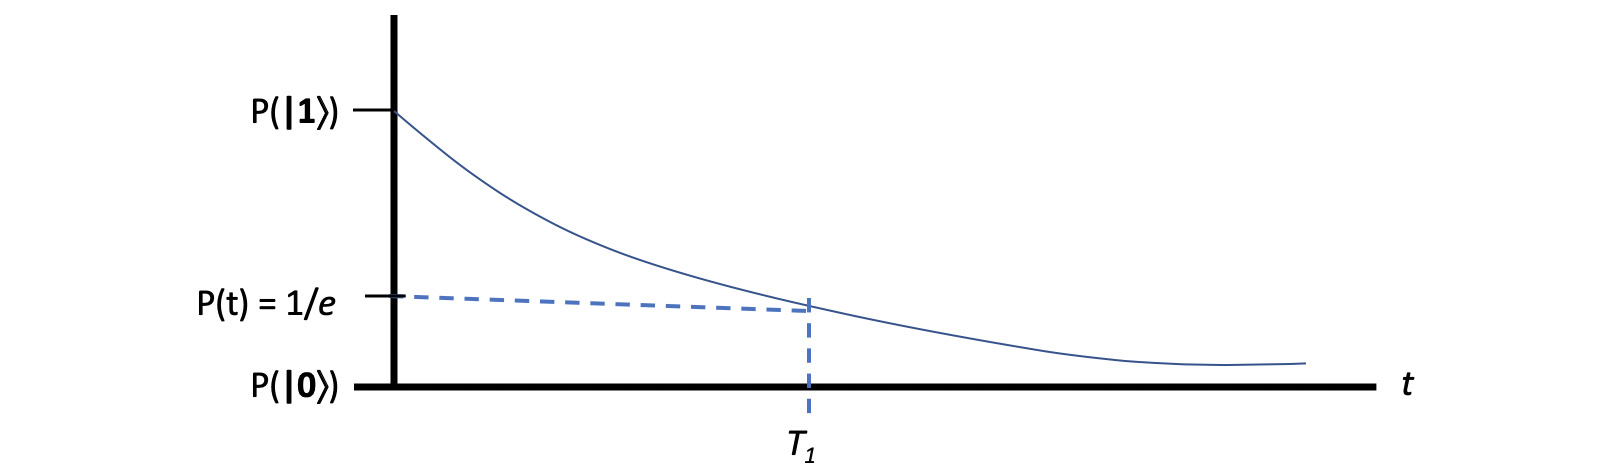 Figure 11.1 – T1 defined as the decay time where the probability of the energy state reaches 1/e
